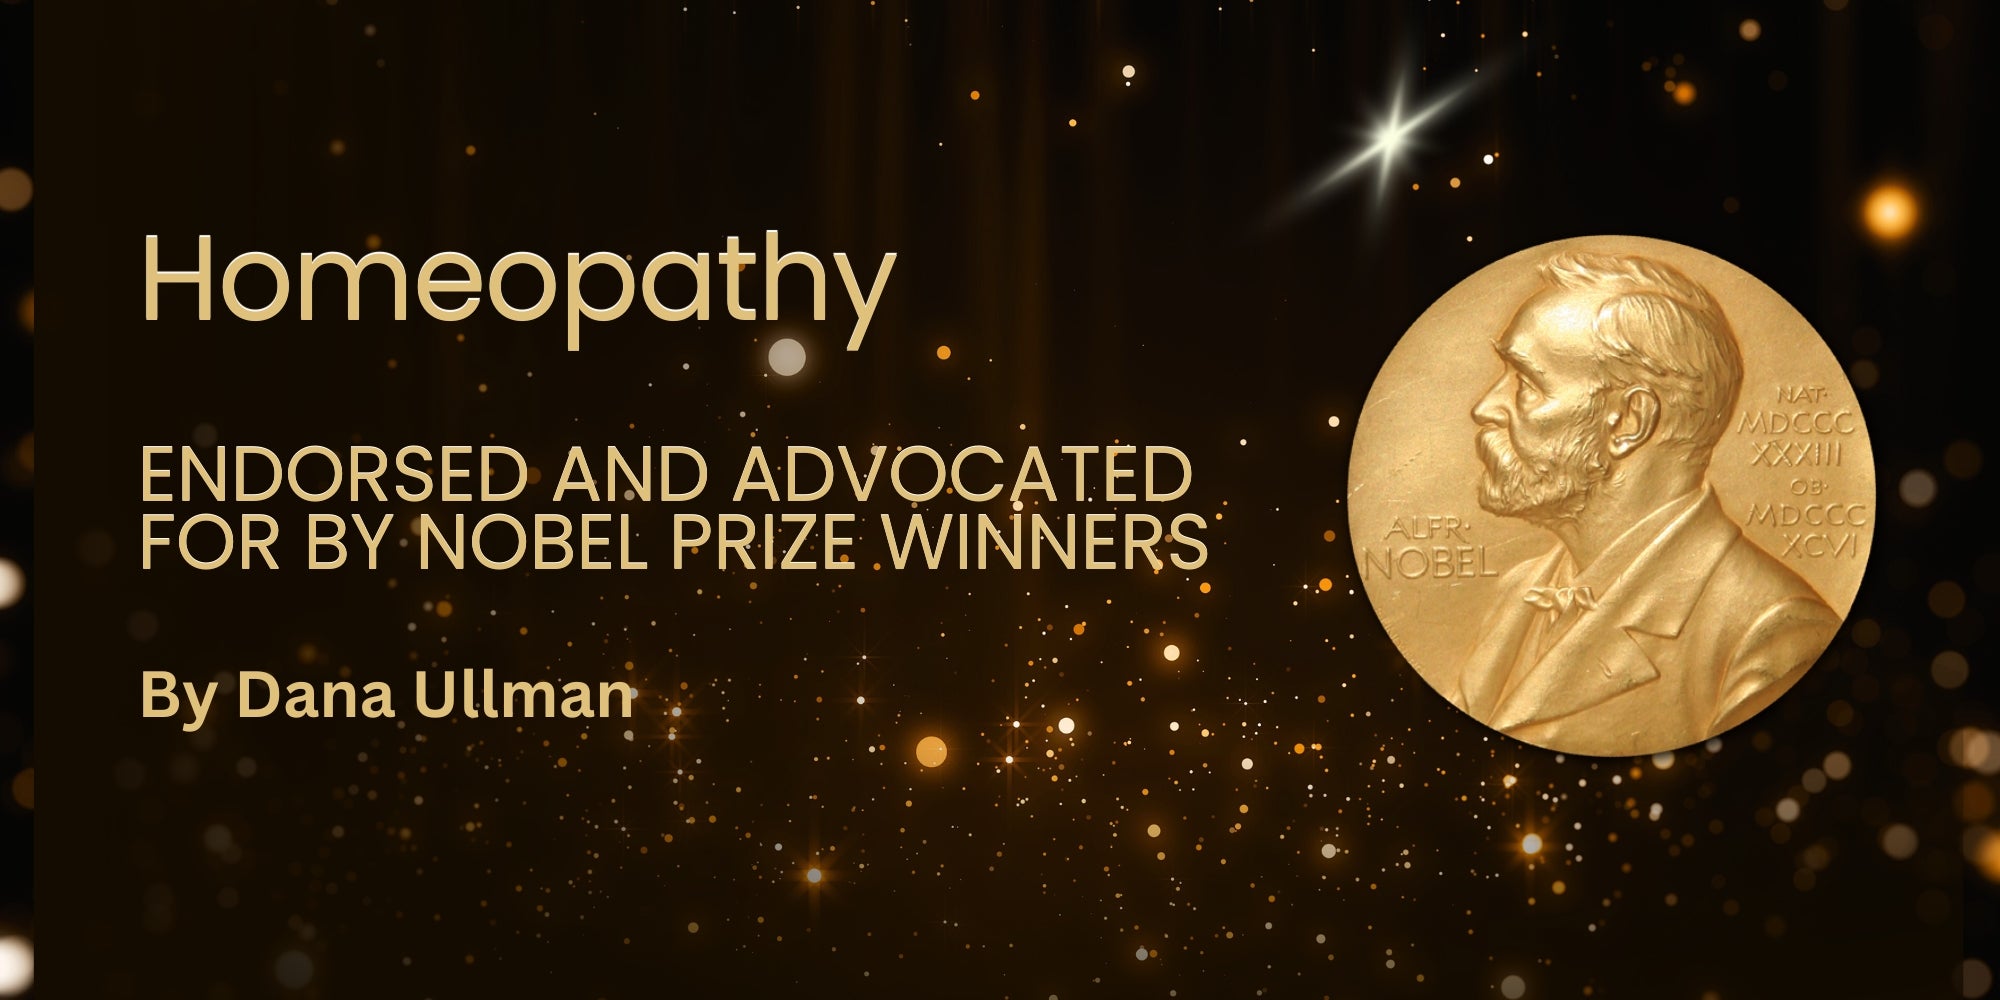 Nobel Prize-Winners Who Advocated for Homeopathic Medicine by DANA ULLMAN, MPH, CCH